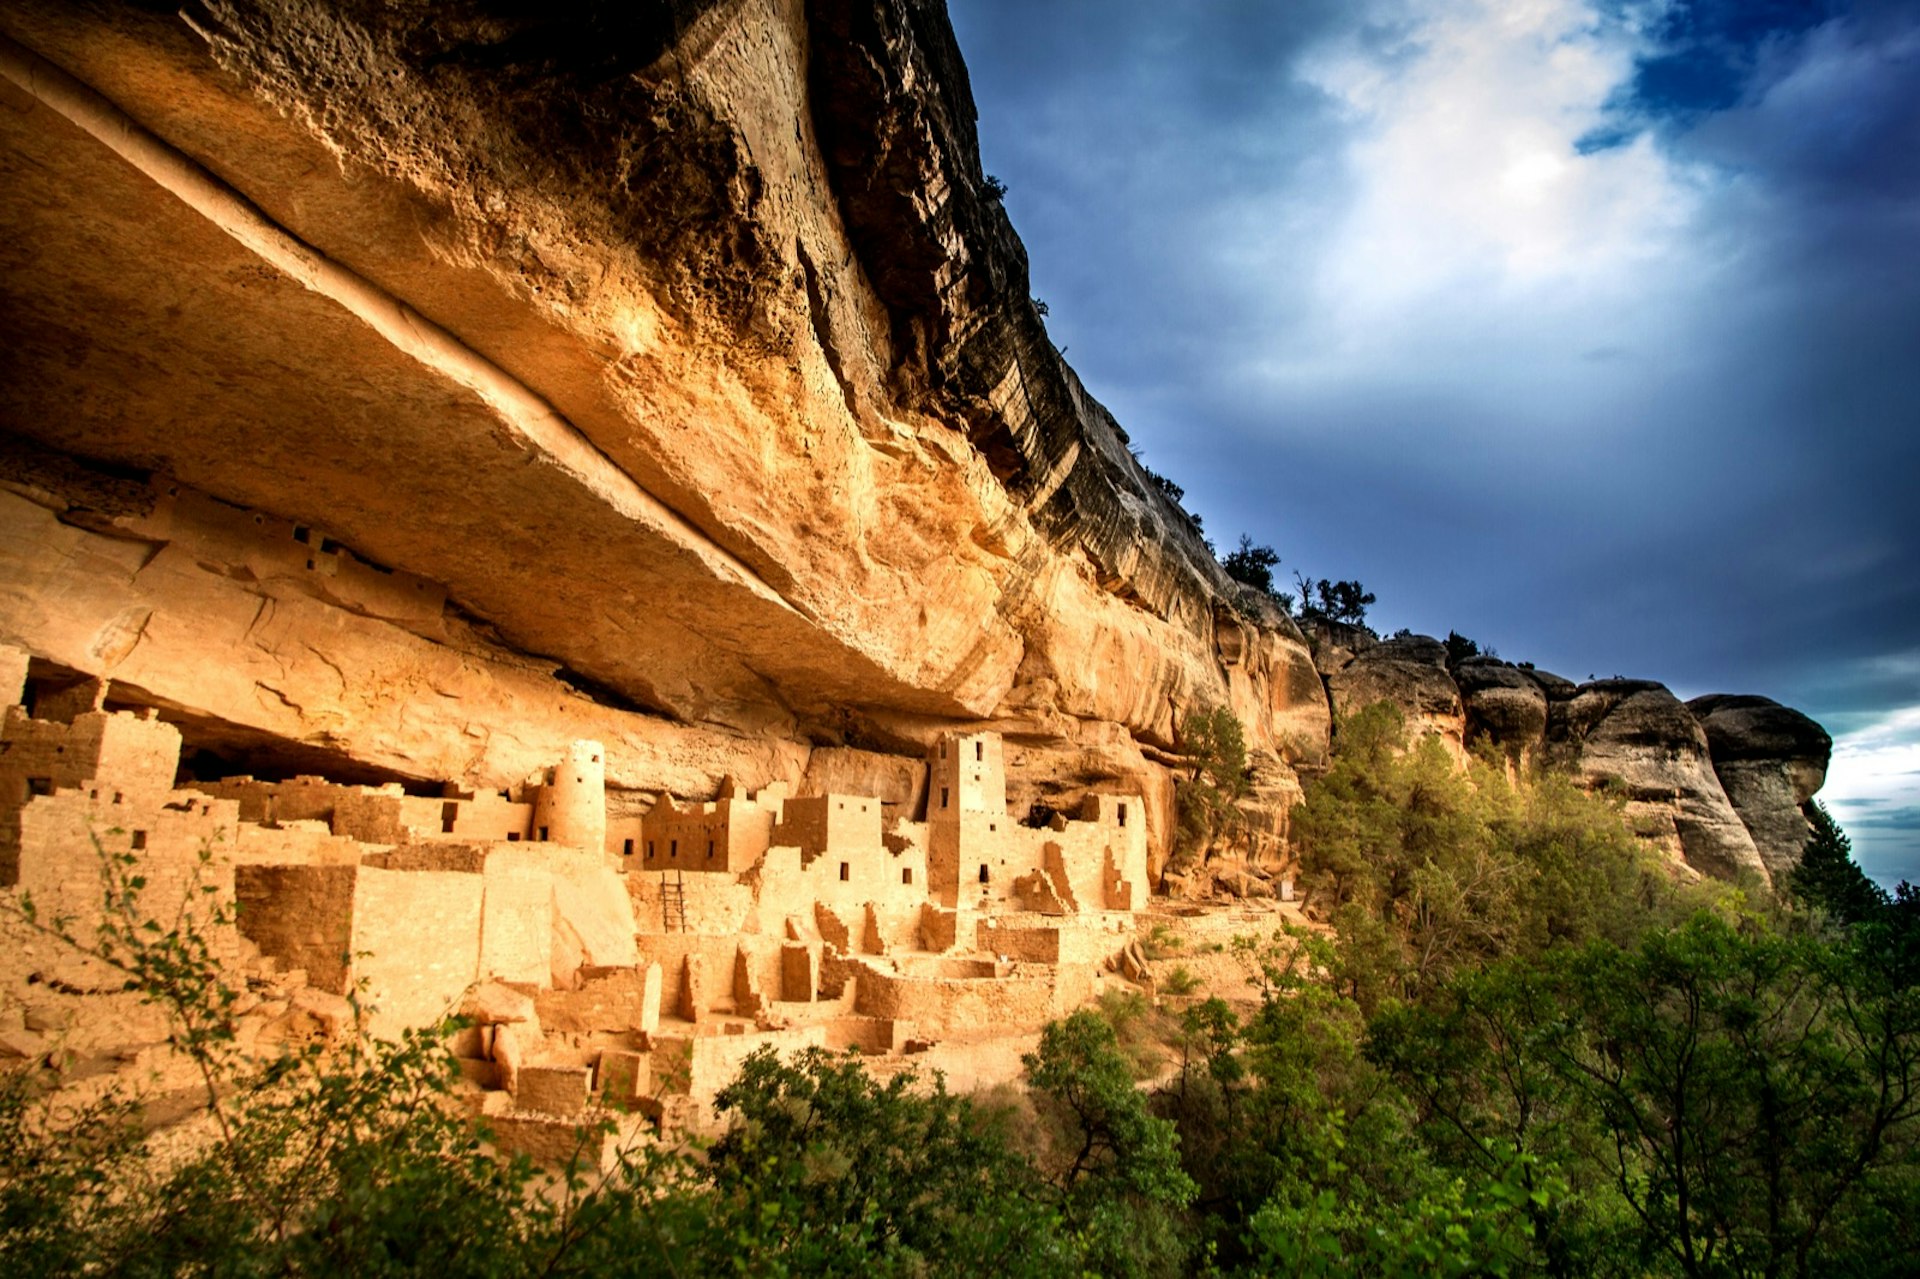 A stormy sky swirls above a cliff face with adobe buildings nestled inside. 